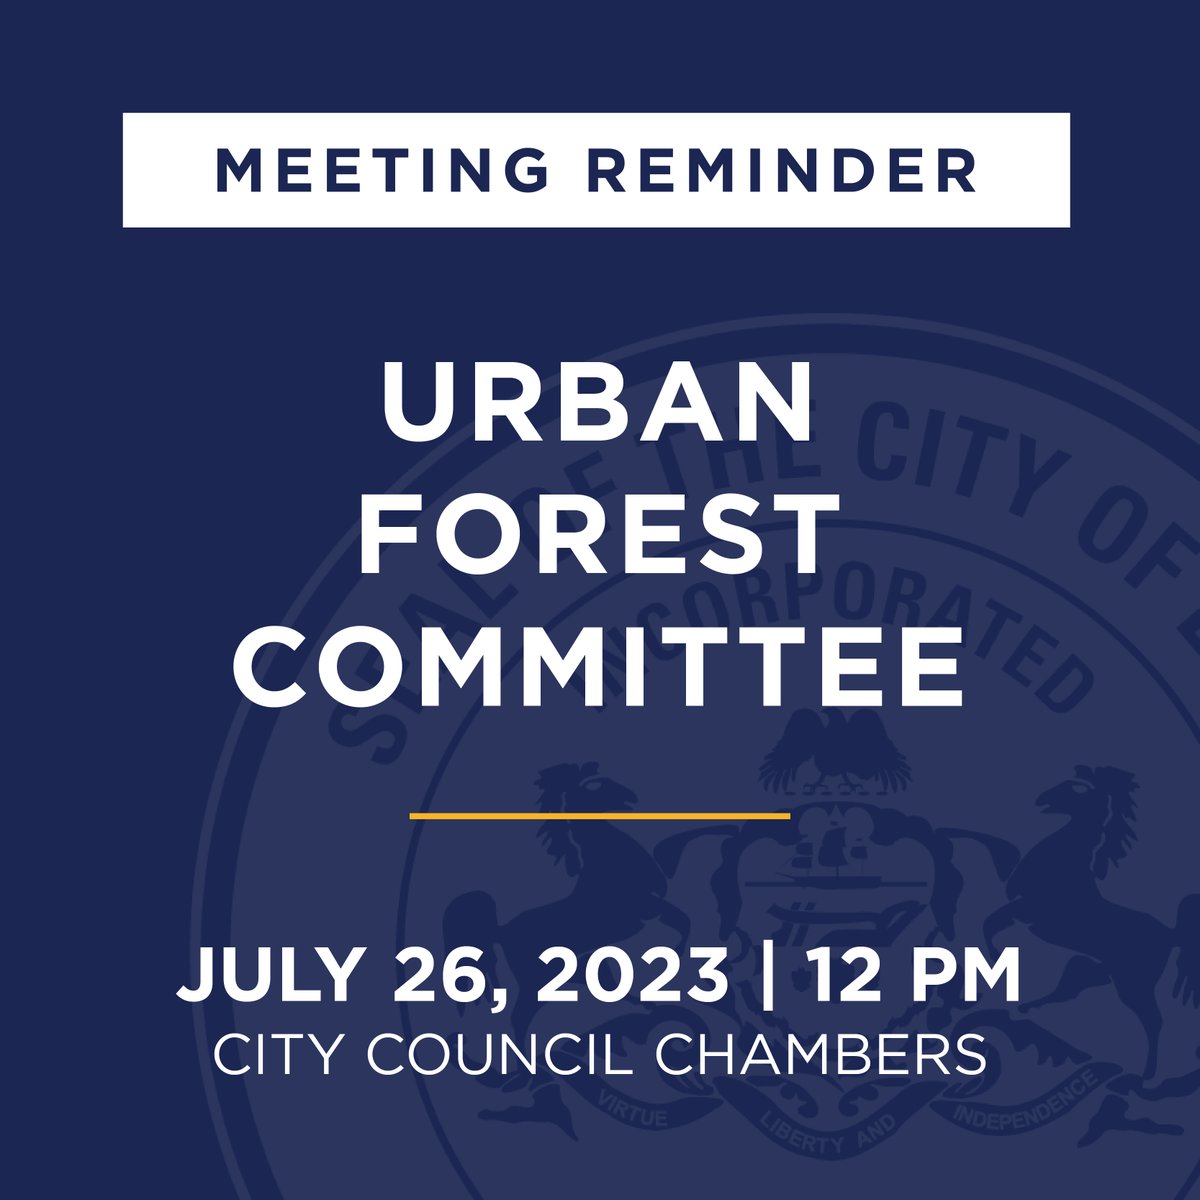 Reminder that the Urban Forest Committee meets today at 12 p.m. in City Council Chambers. #CityofErie #EriePA